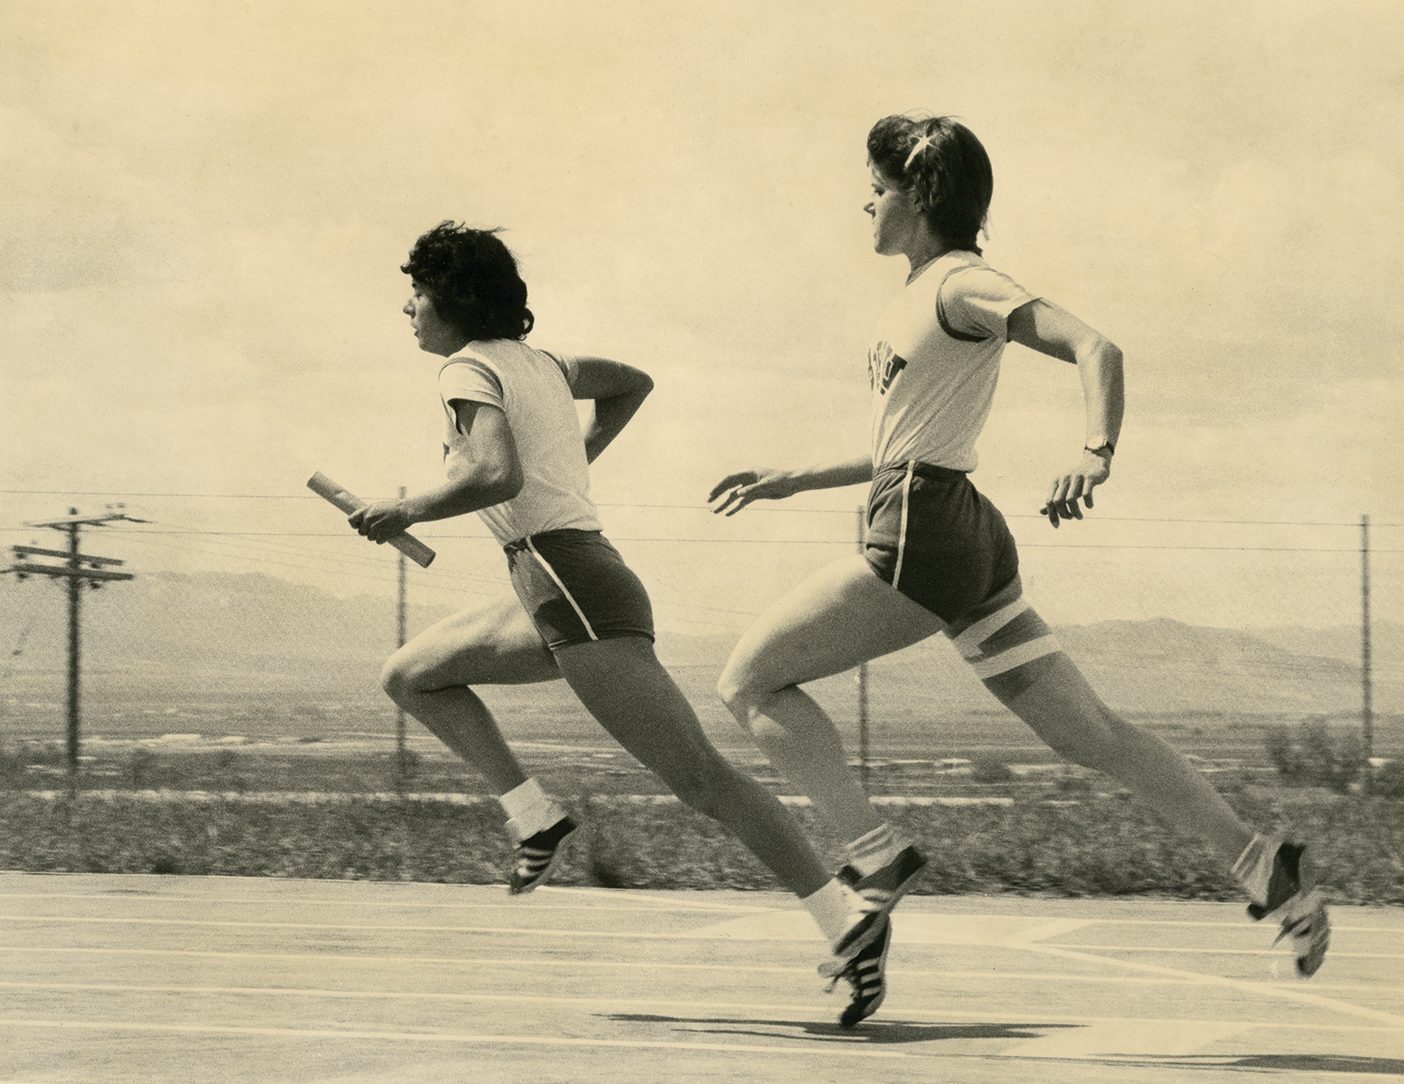 A photo from the '70s shows María Guadalupe García Cardiell practicing at the track with BYU teammate Linda Bourn.